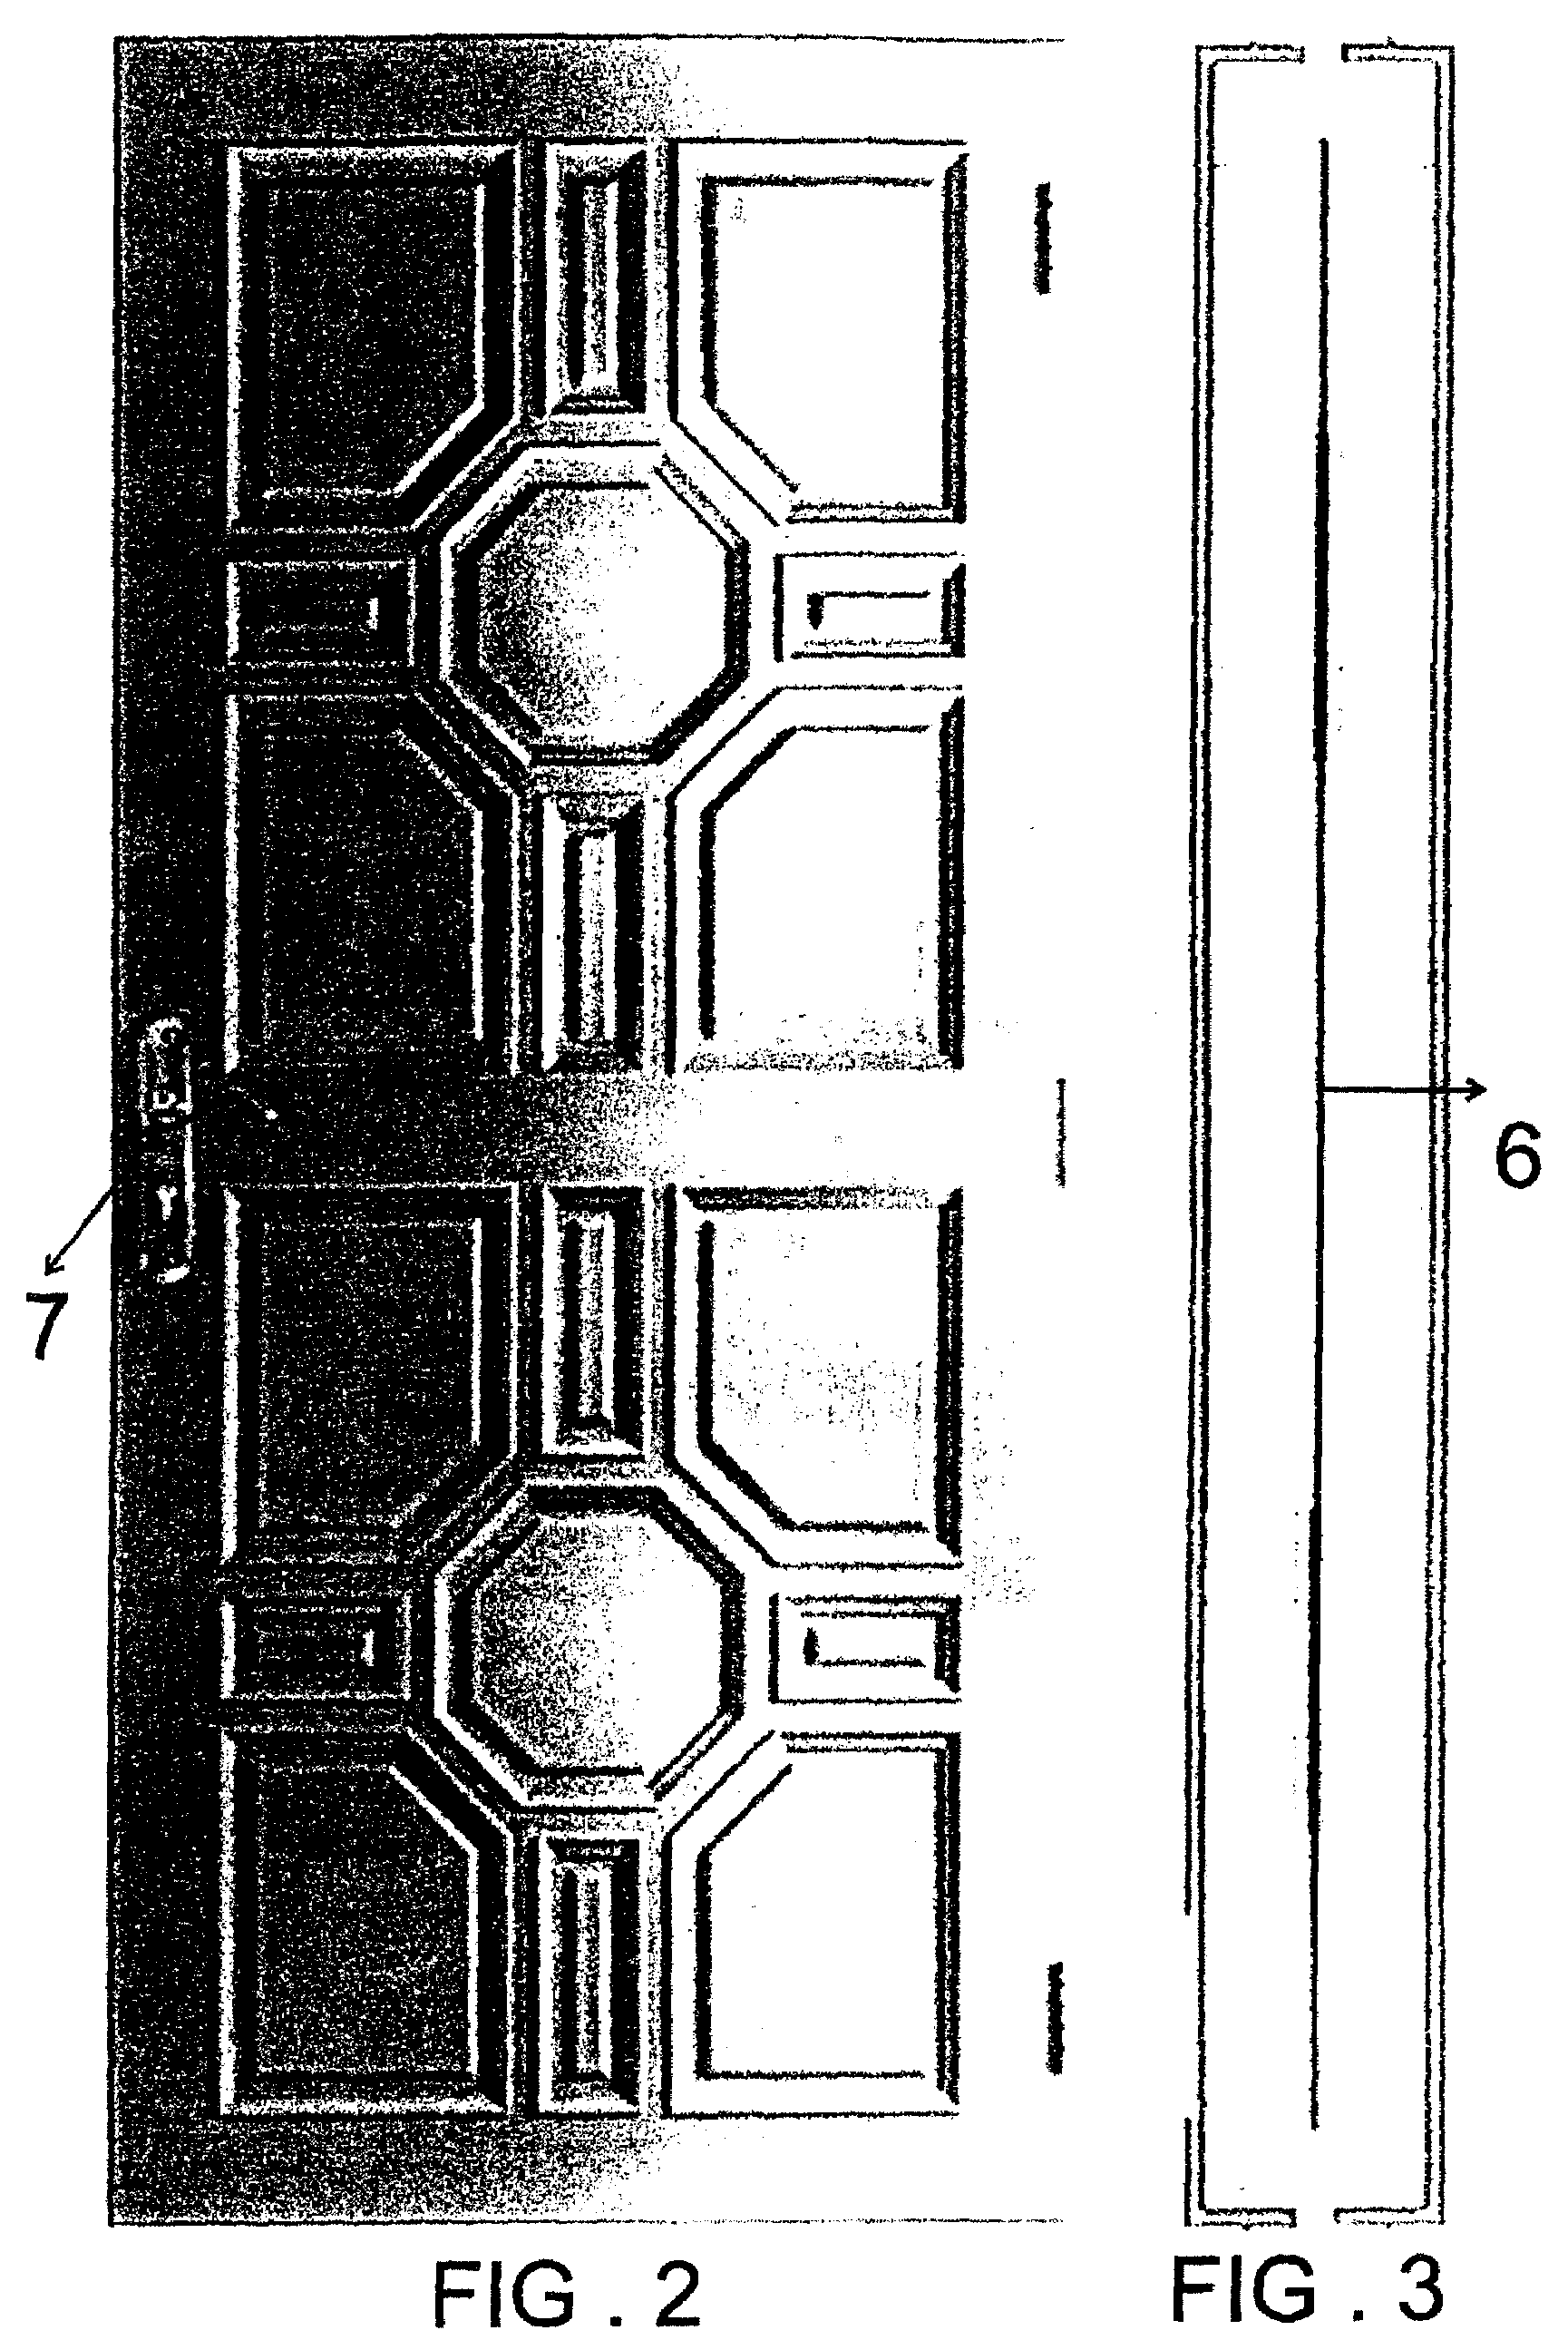 Method for manufacturing of composite door panel using injection molding technology